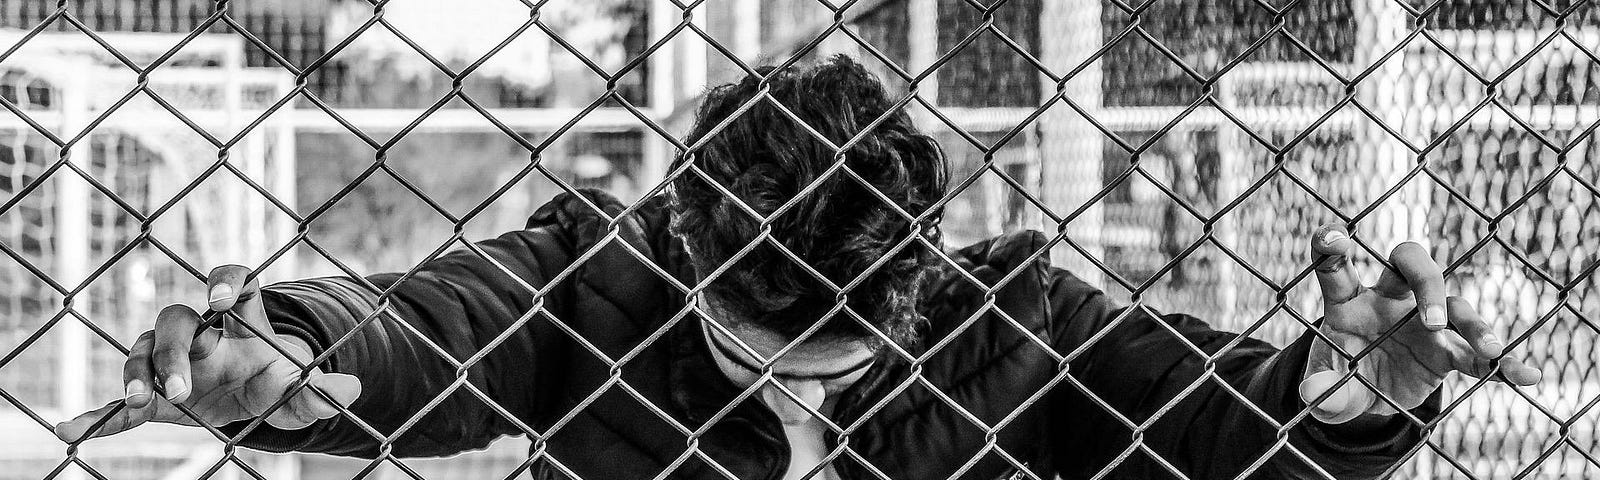 A black & white photo of someone behind a chain link fence, head bowed and hands gripping the fence.